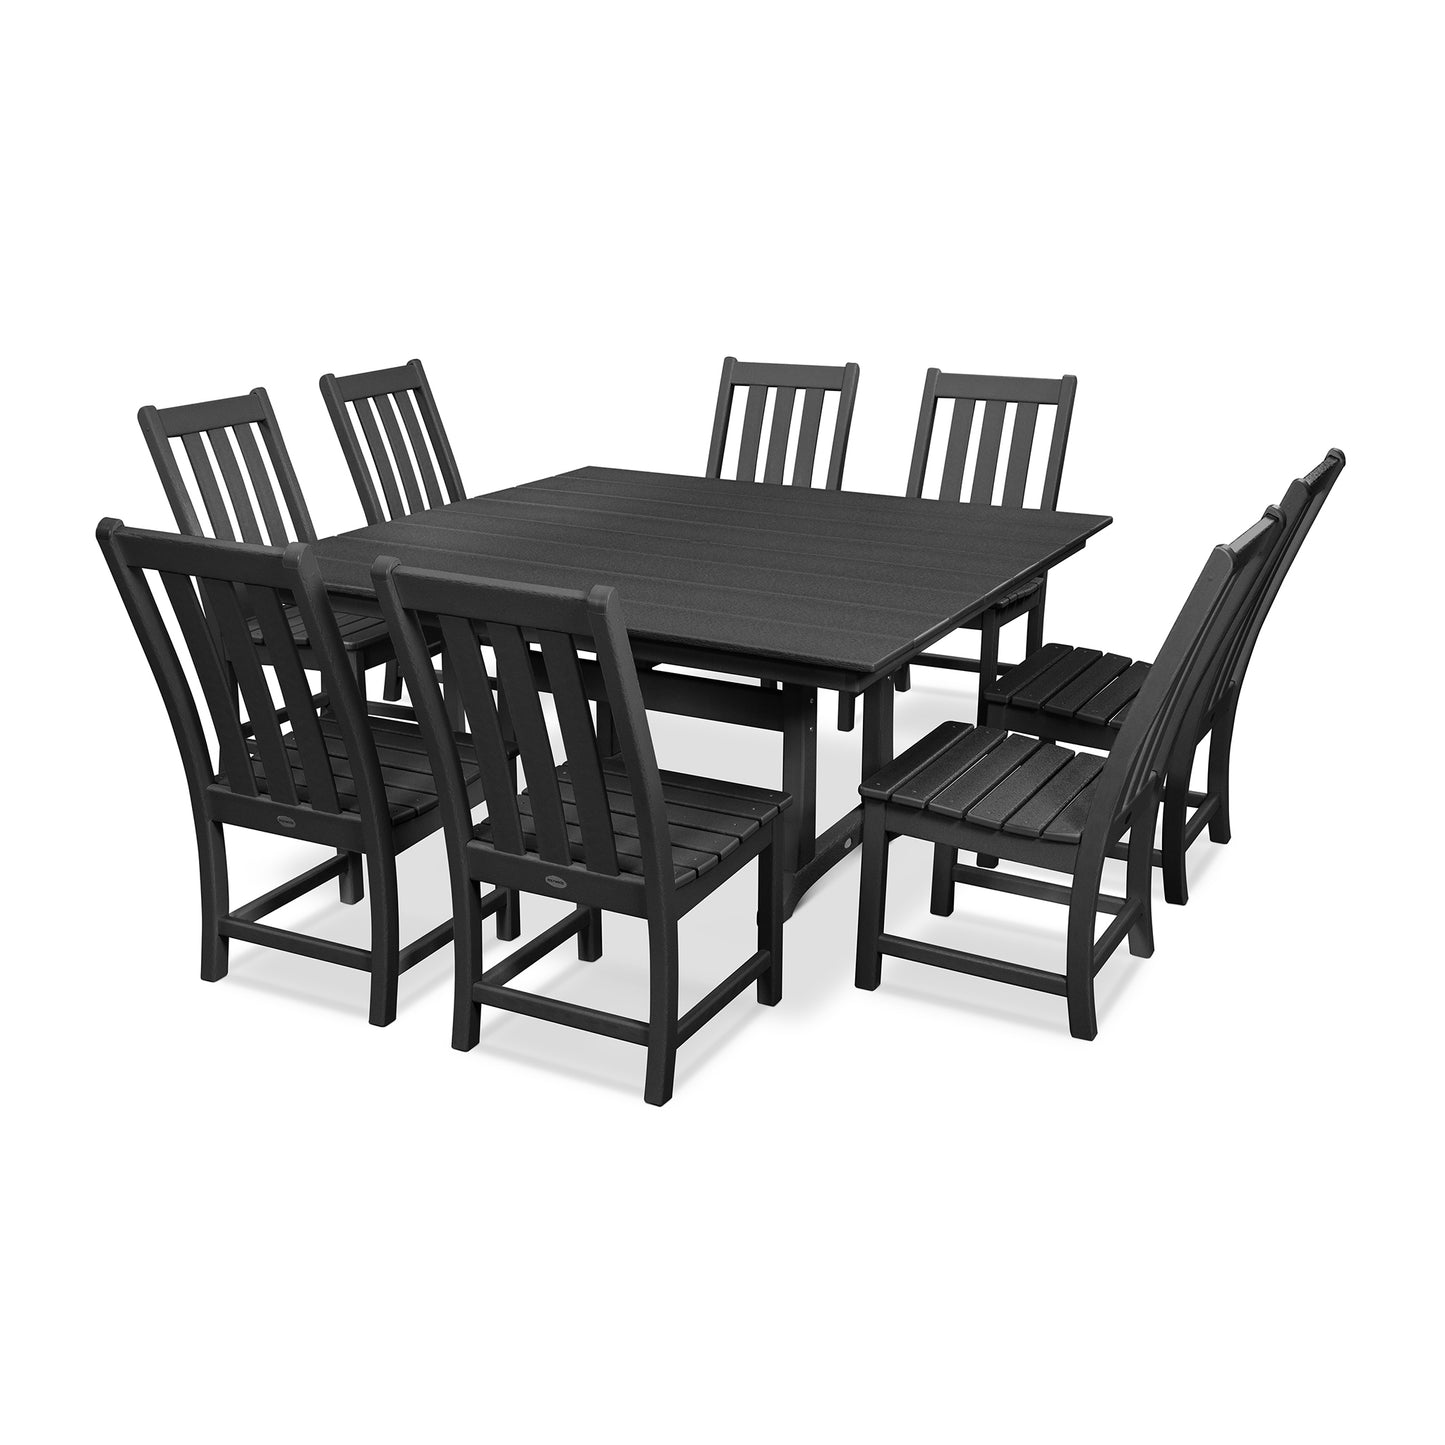 A modern outdoor dining set featuring a large black POLYWOOD Vineyard 9-Piece Farmhouse Trestle Dining Set table and six matching chairs, all made from durable POLYWOOD material, displayed on a white background.